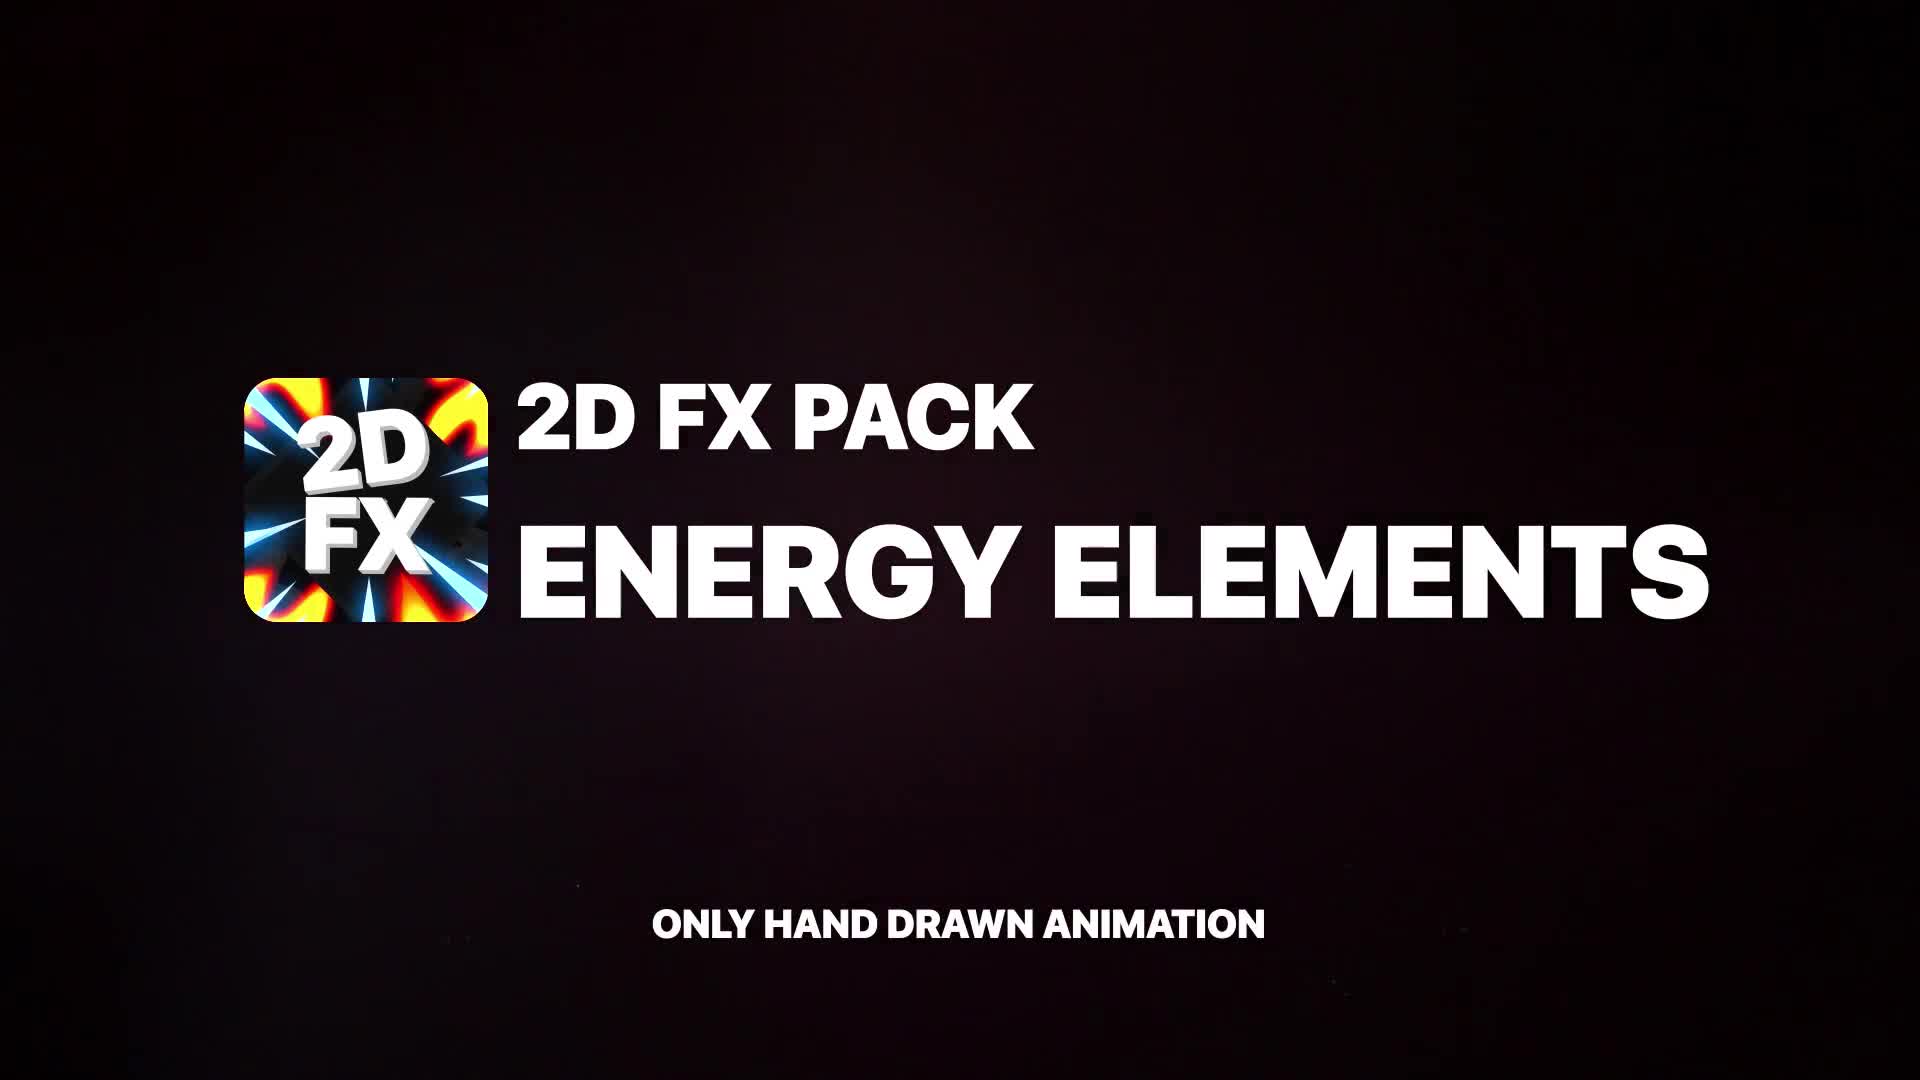 Energy And Explosion Elements + Titles - Download Videohive 22553706